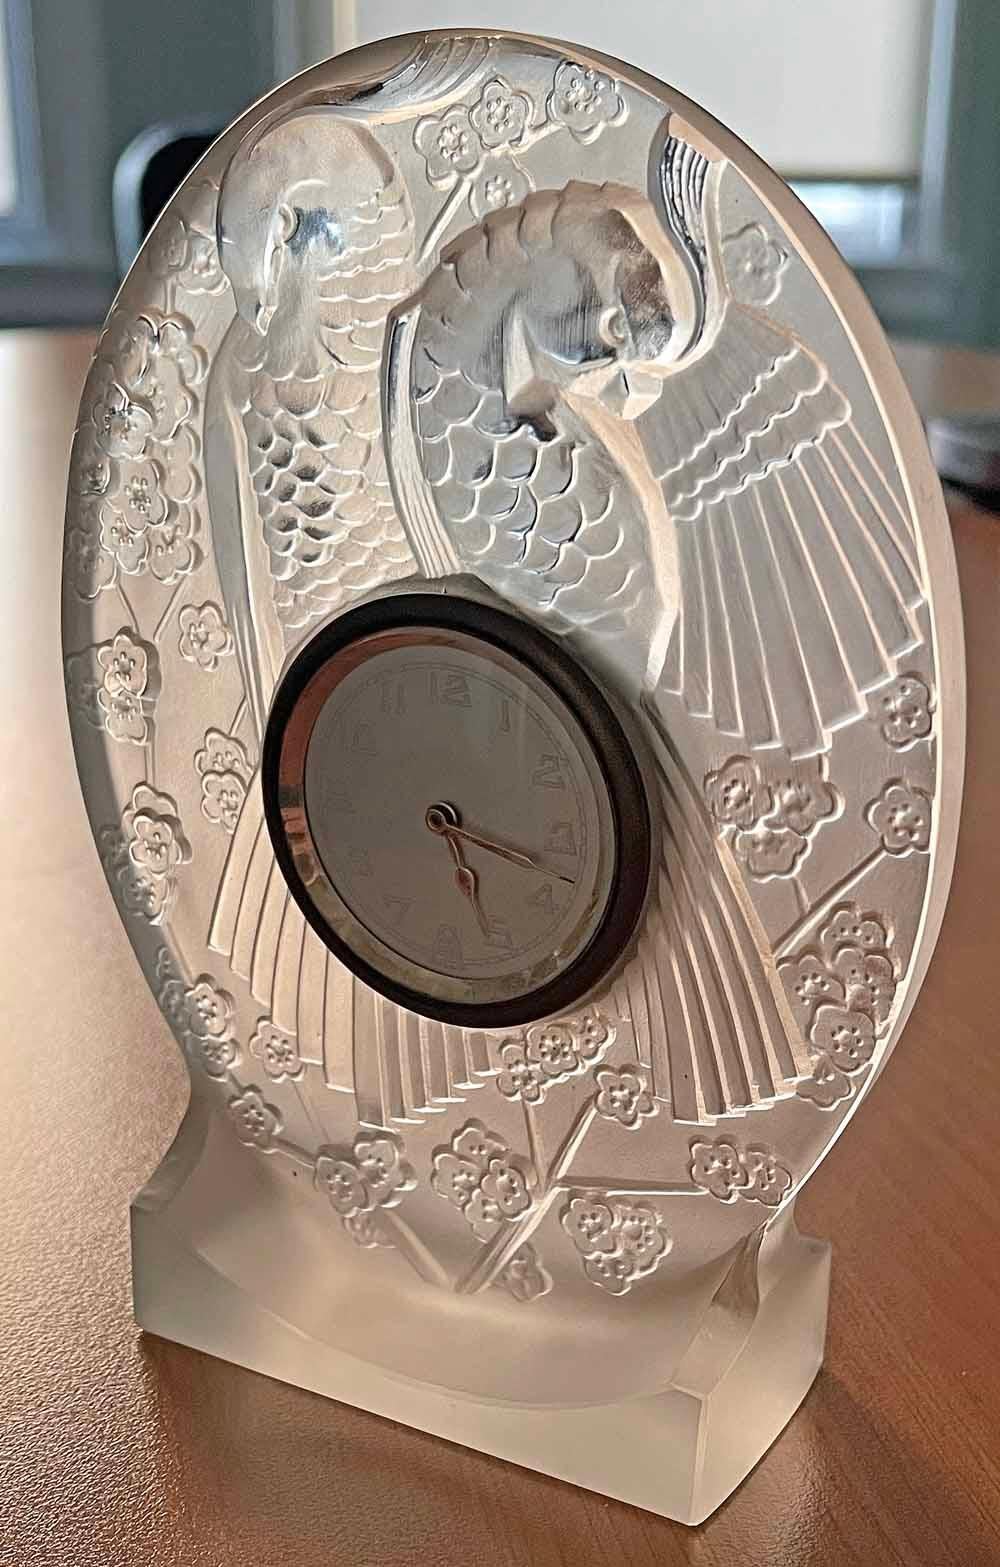 Virtually glowing as light passes through its satiny glass, this highly rare Art Deco clock by Maurice Model features two parrots grooming their feathers amidst a profusion of flowering branches.  Of all the artists and makers in France who